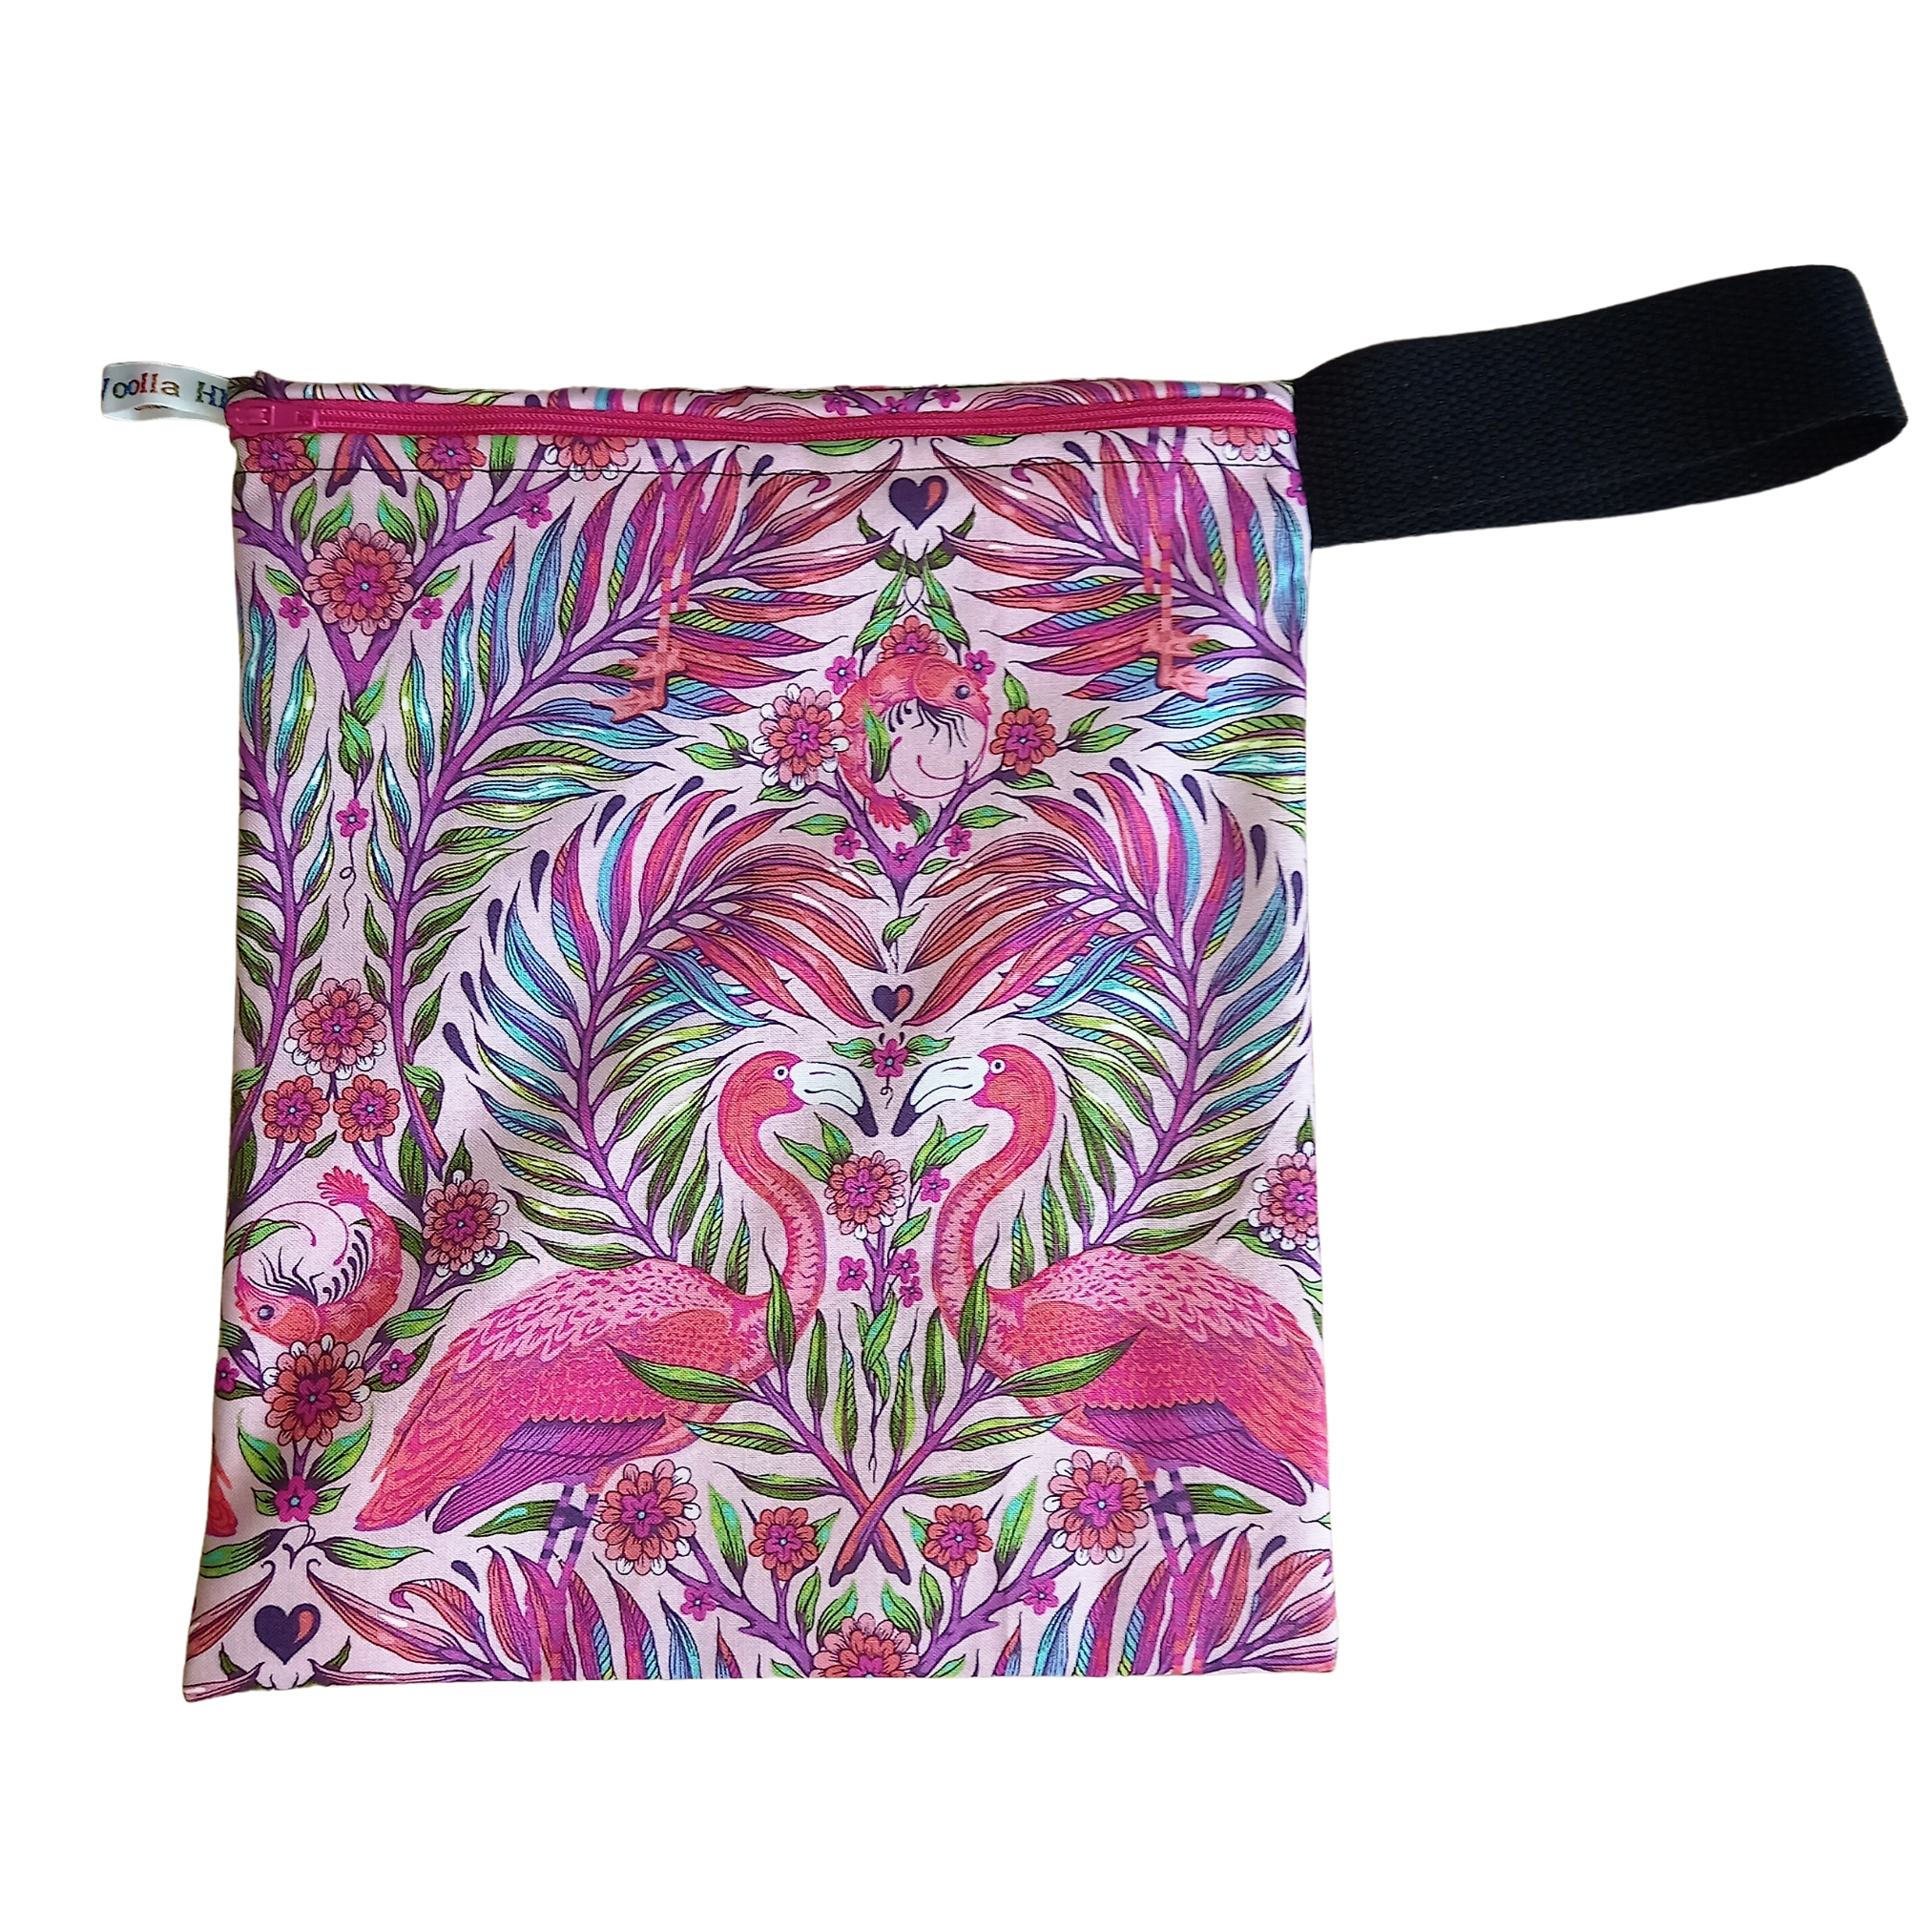 Flamingo Pink TU -  Handy Poppins Pouch, Waterproof, Washable, Food Safe, Vegan, Lined Zip Bag With Wrist Strap